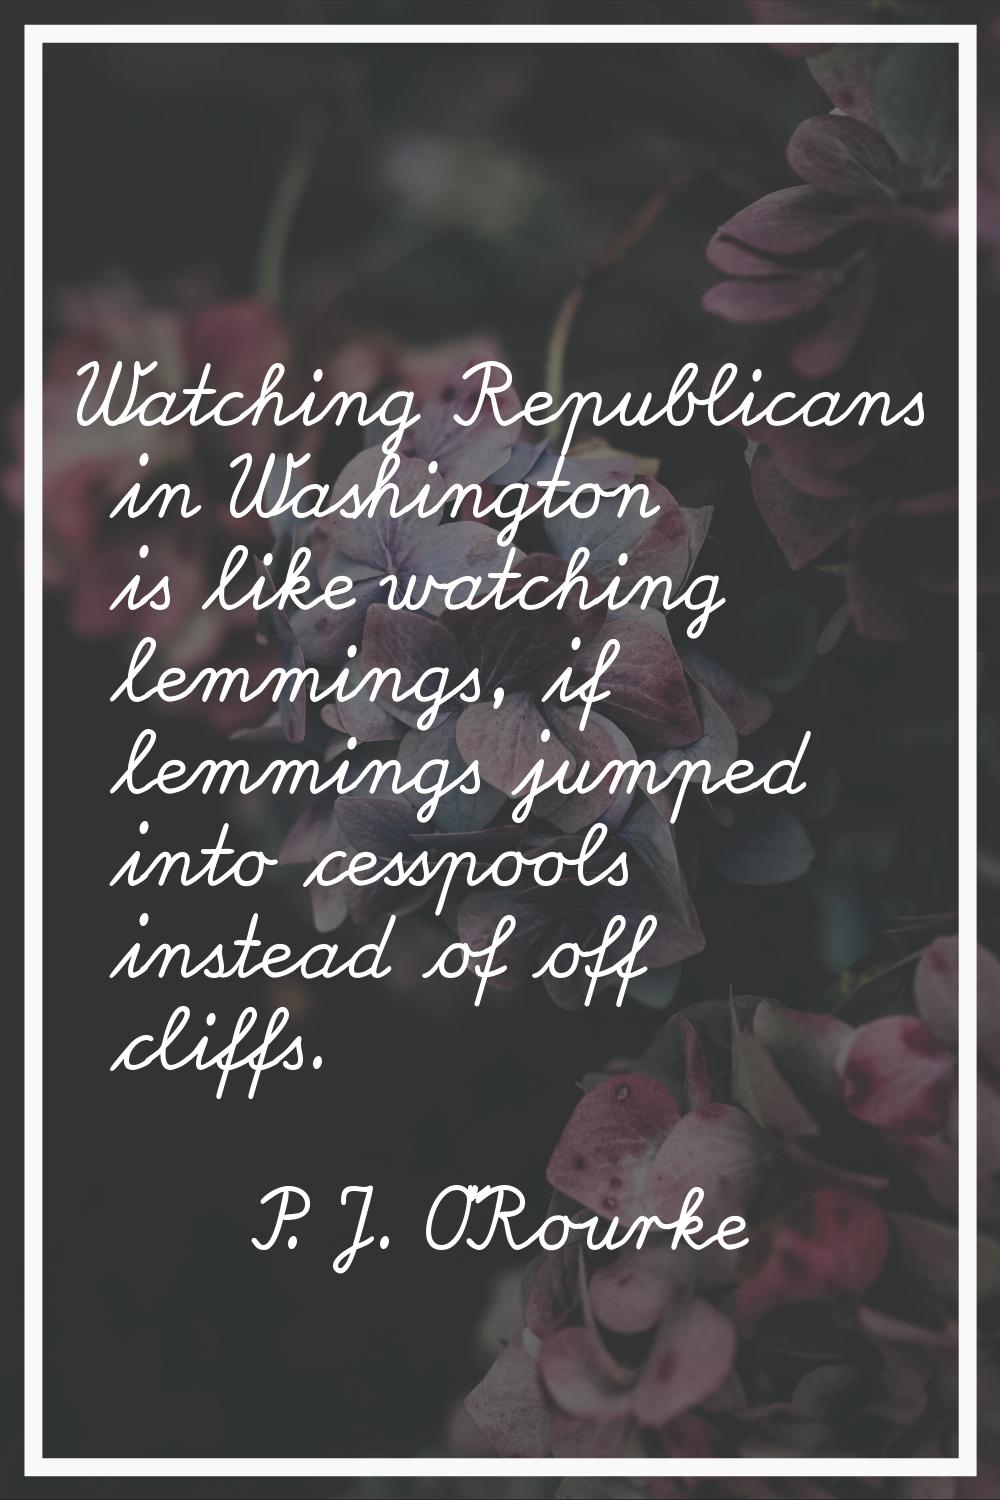 Watching Republicans in Washington is like watching lemmings, if lemmings jumped into cesspools ins